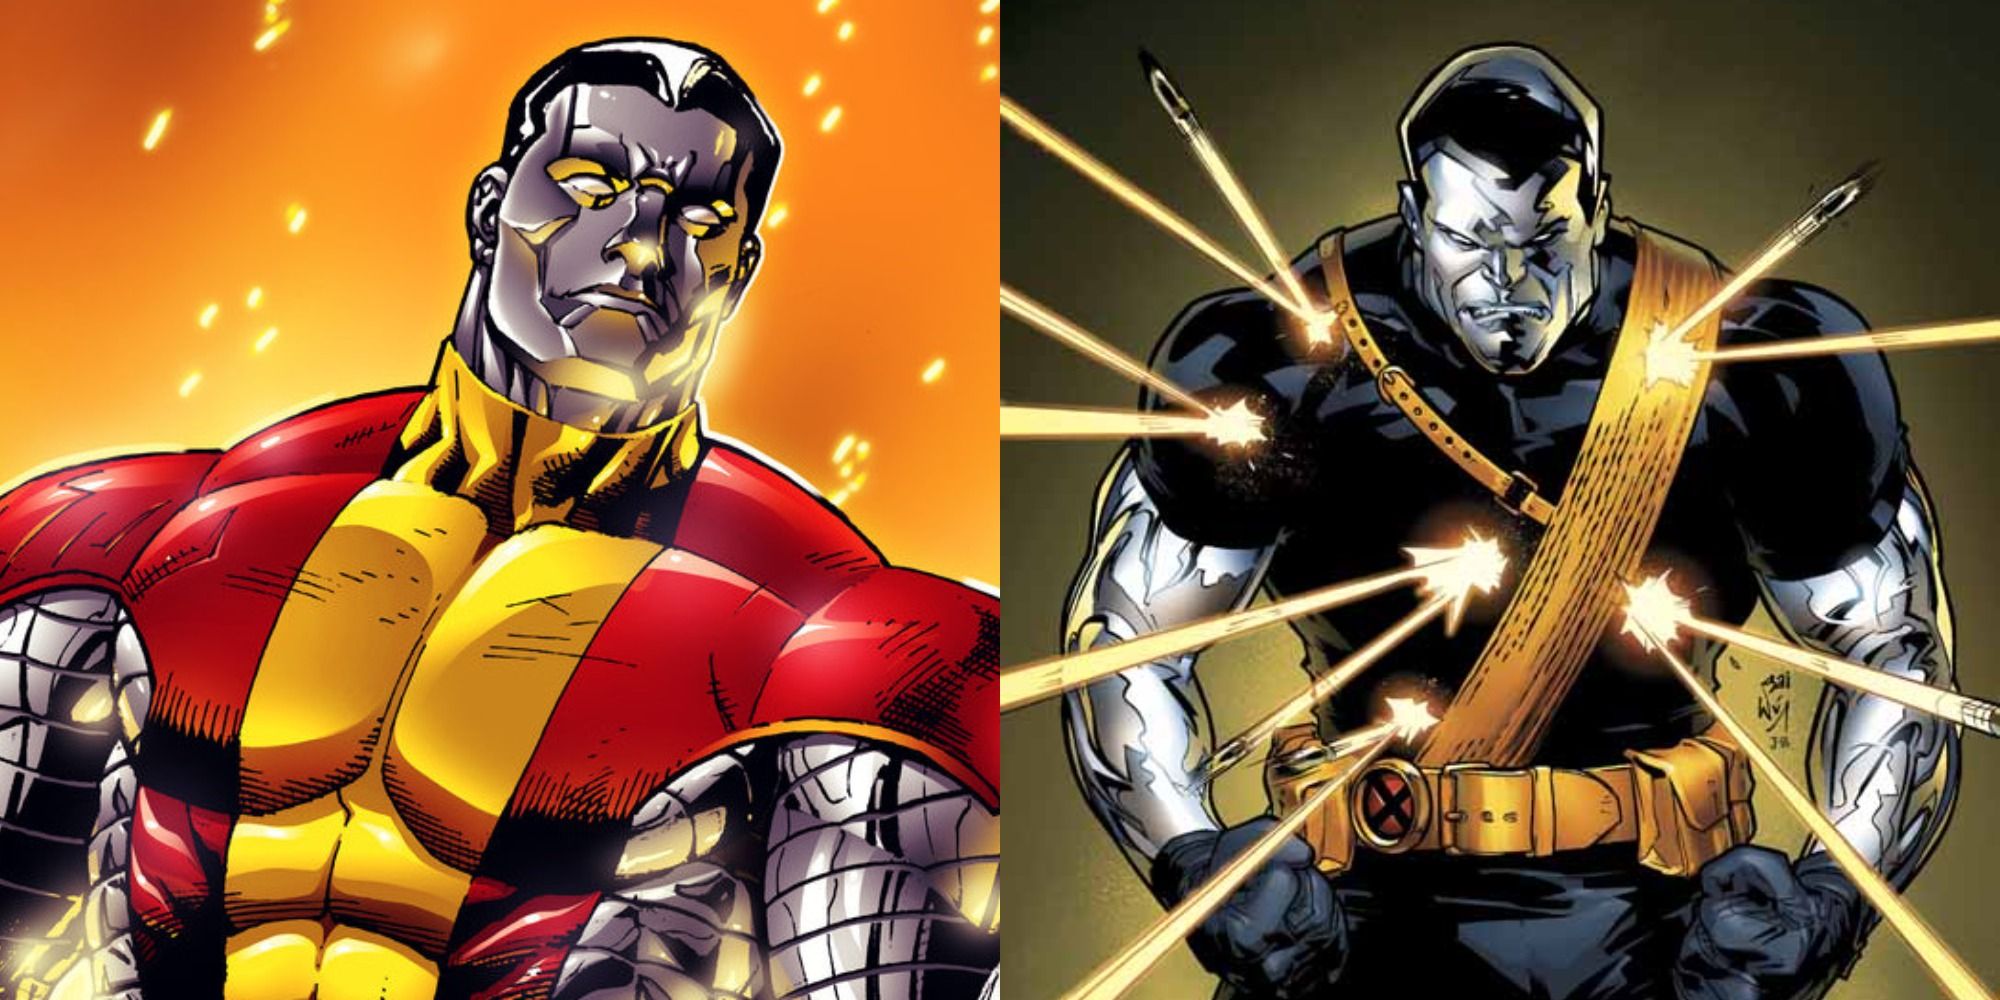 Split image of Colossus and Colossus deflecting bullets.